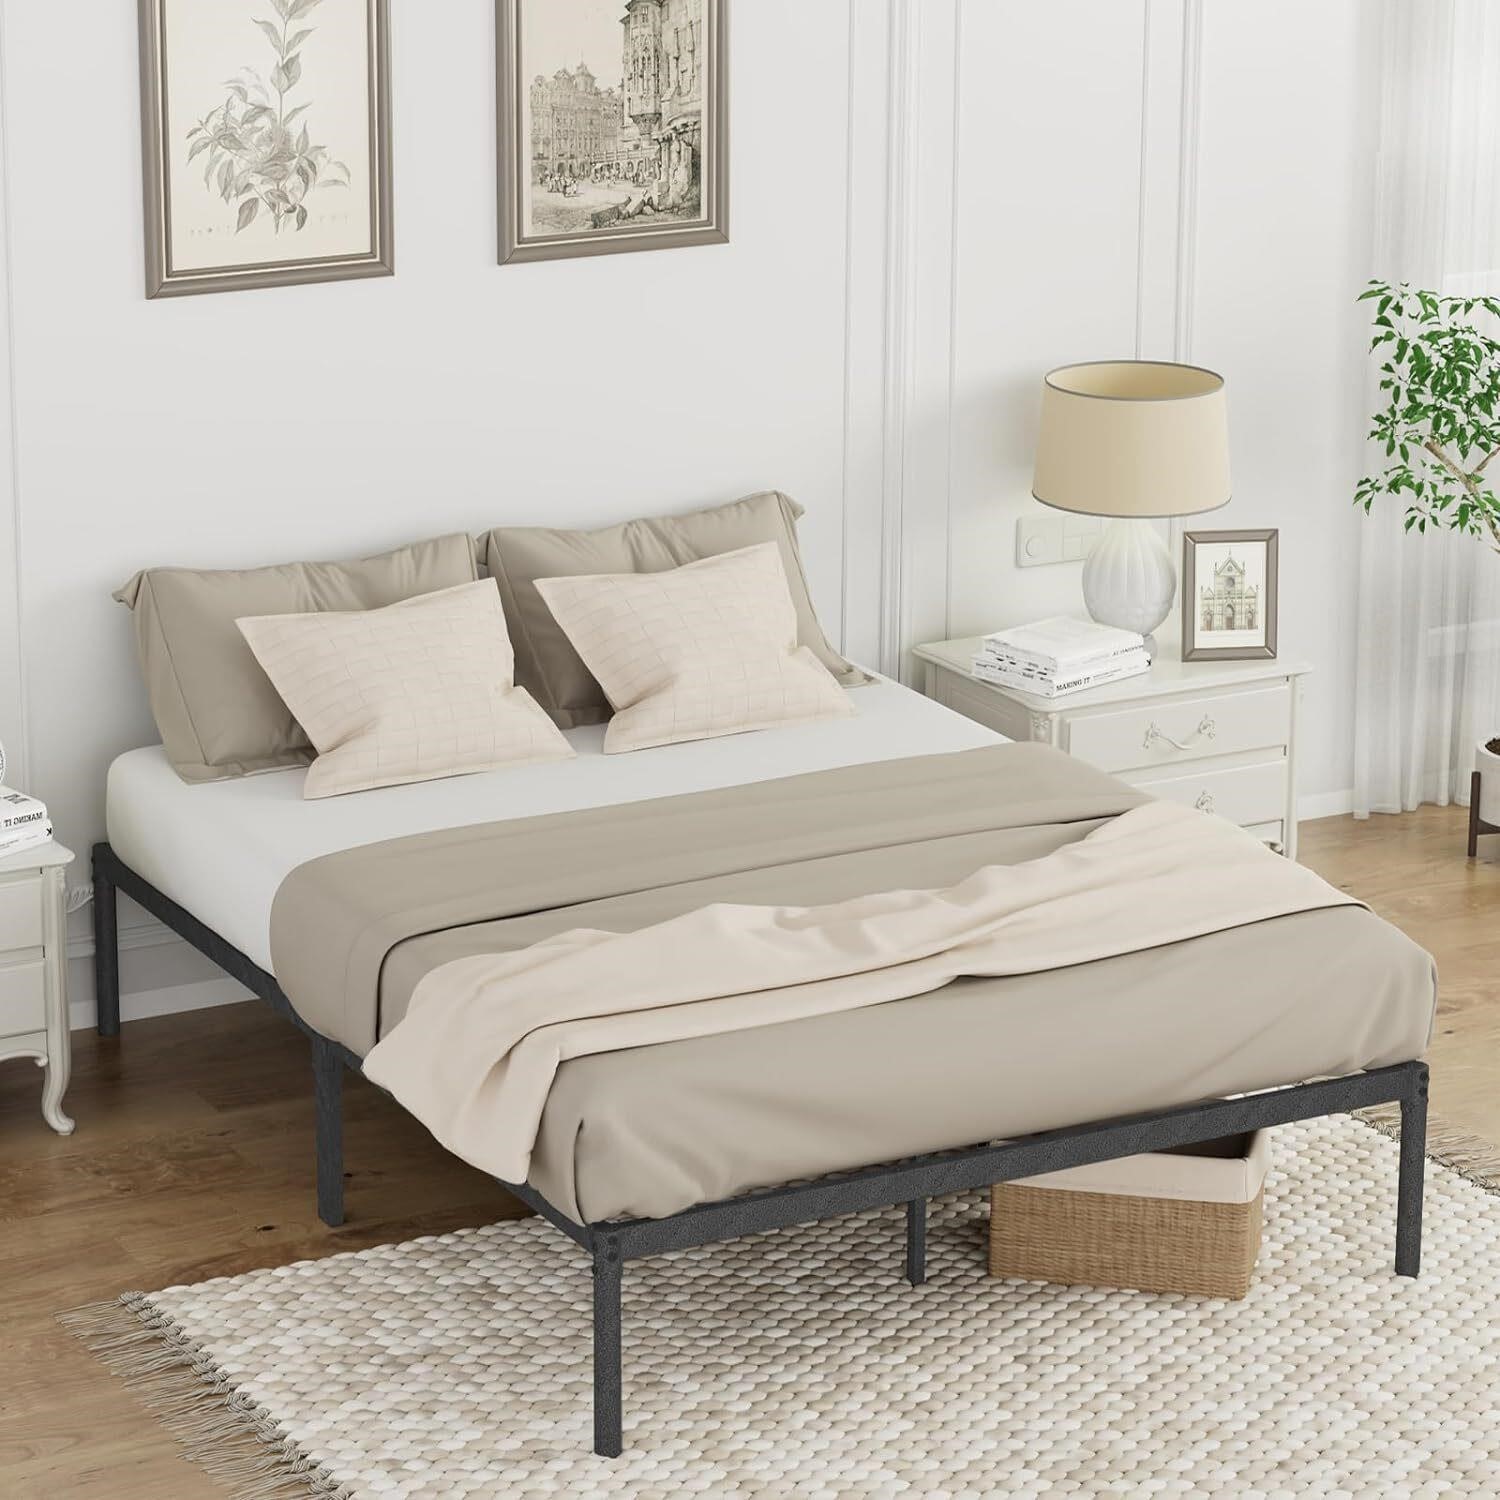 Queen Metal Bed  12 Reinforced  Easy Assembly